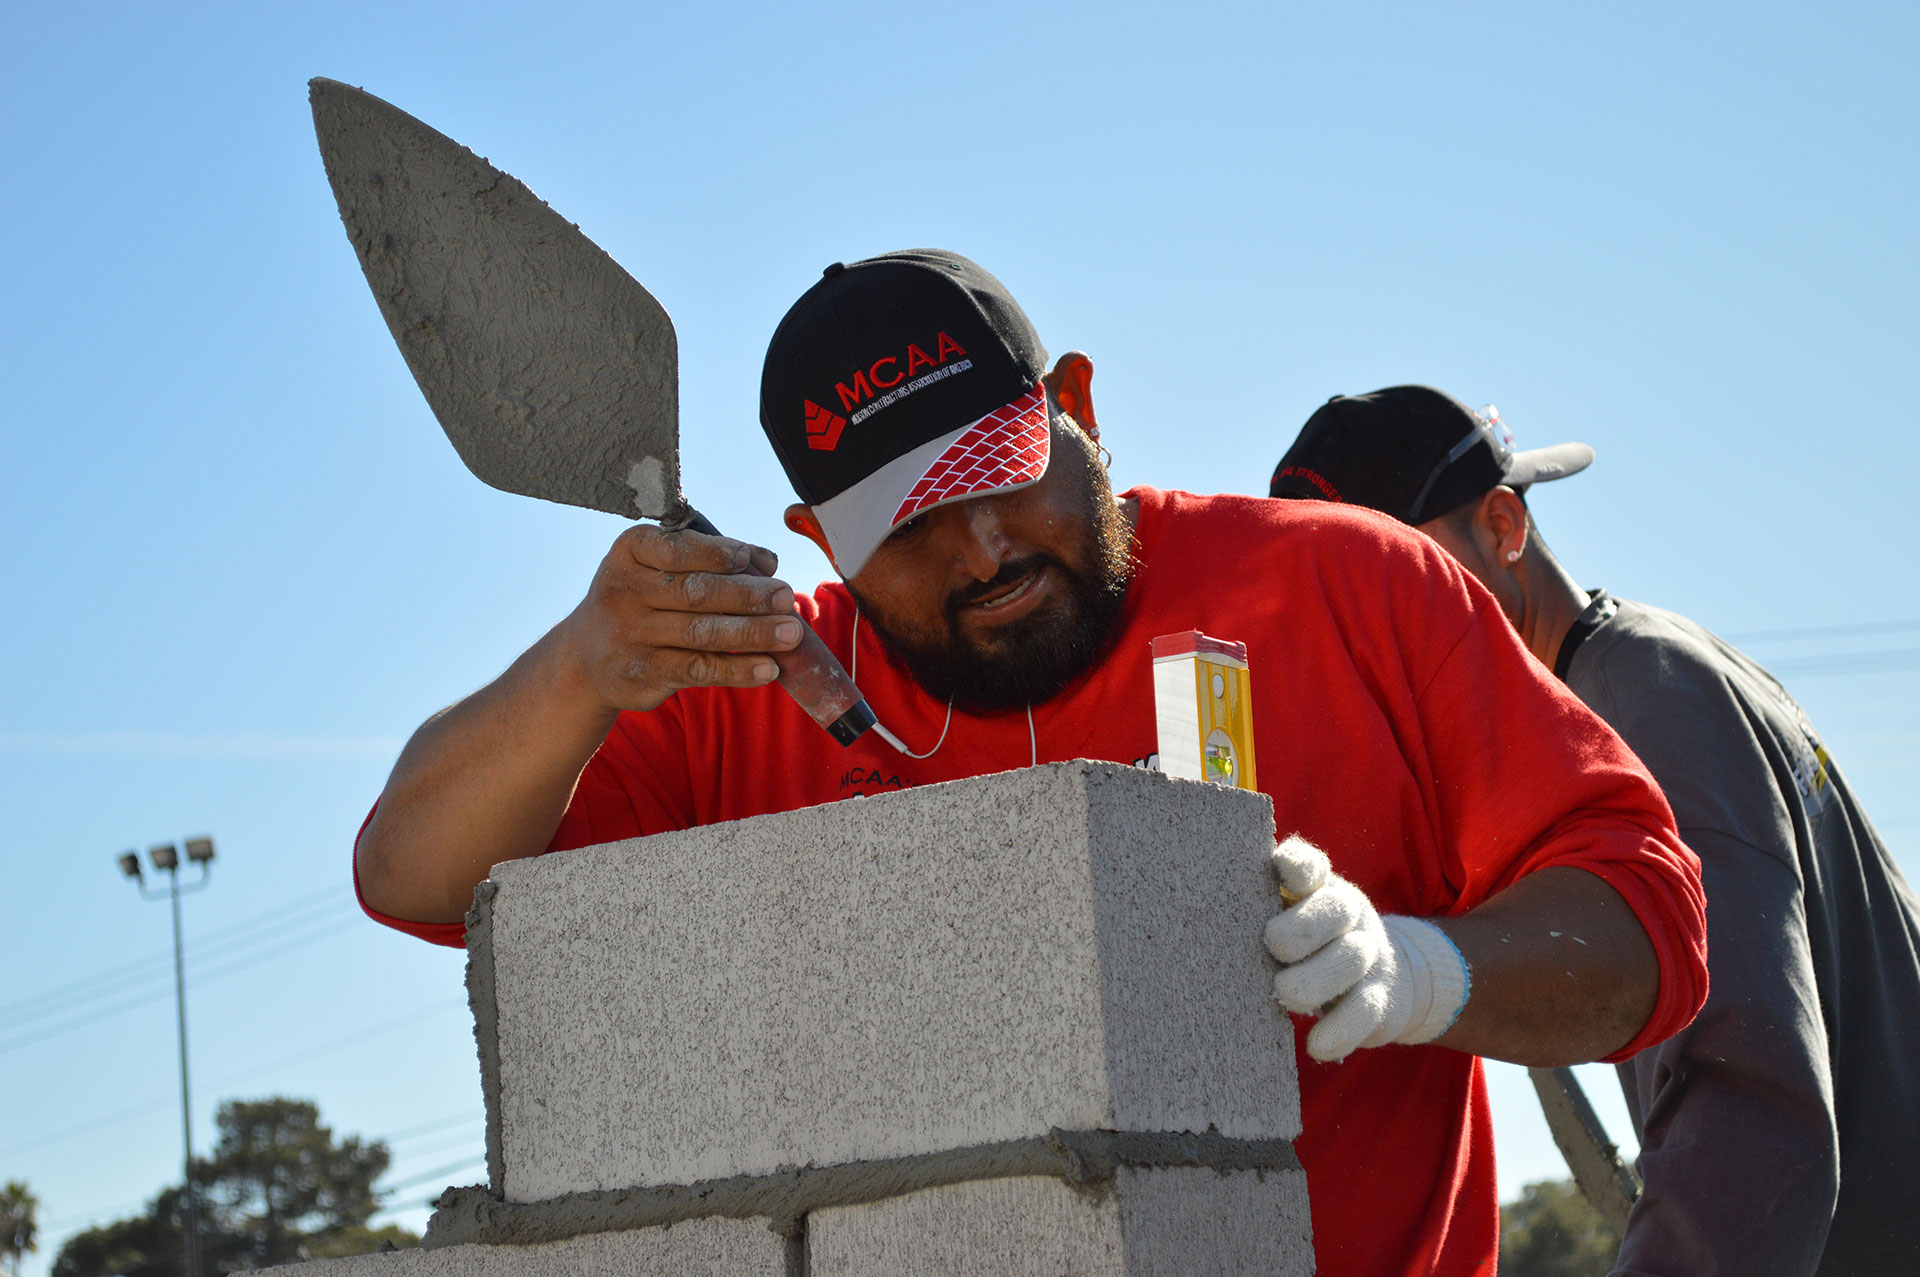 2018 Fastest Trowel on the Block, First Place - Jose Soto